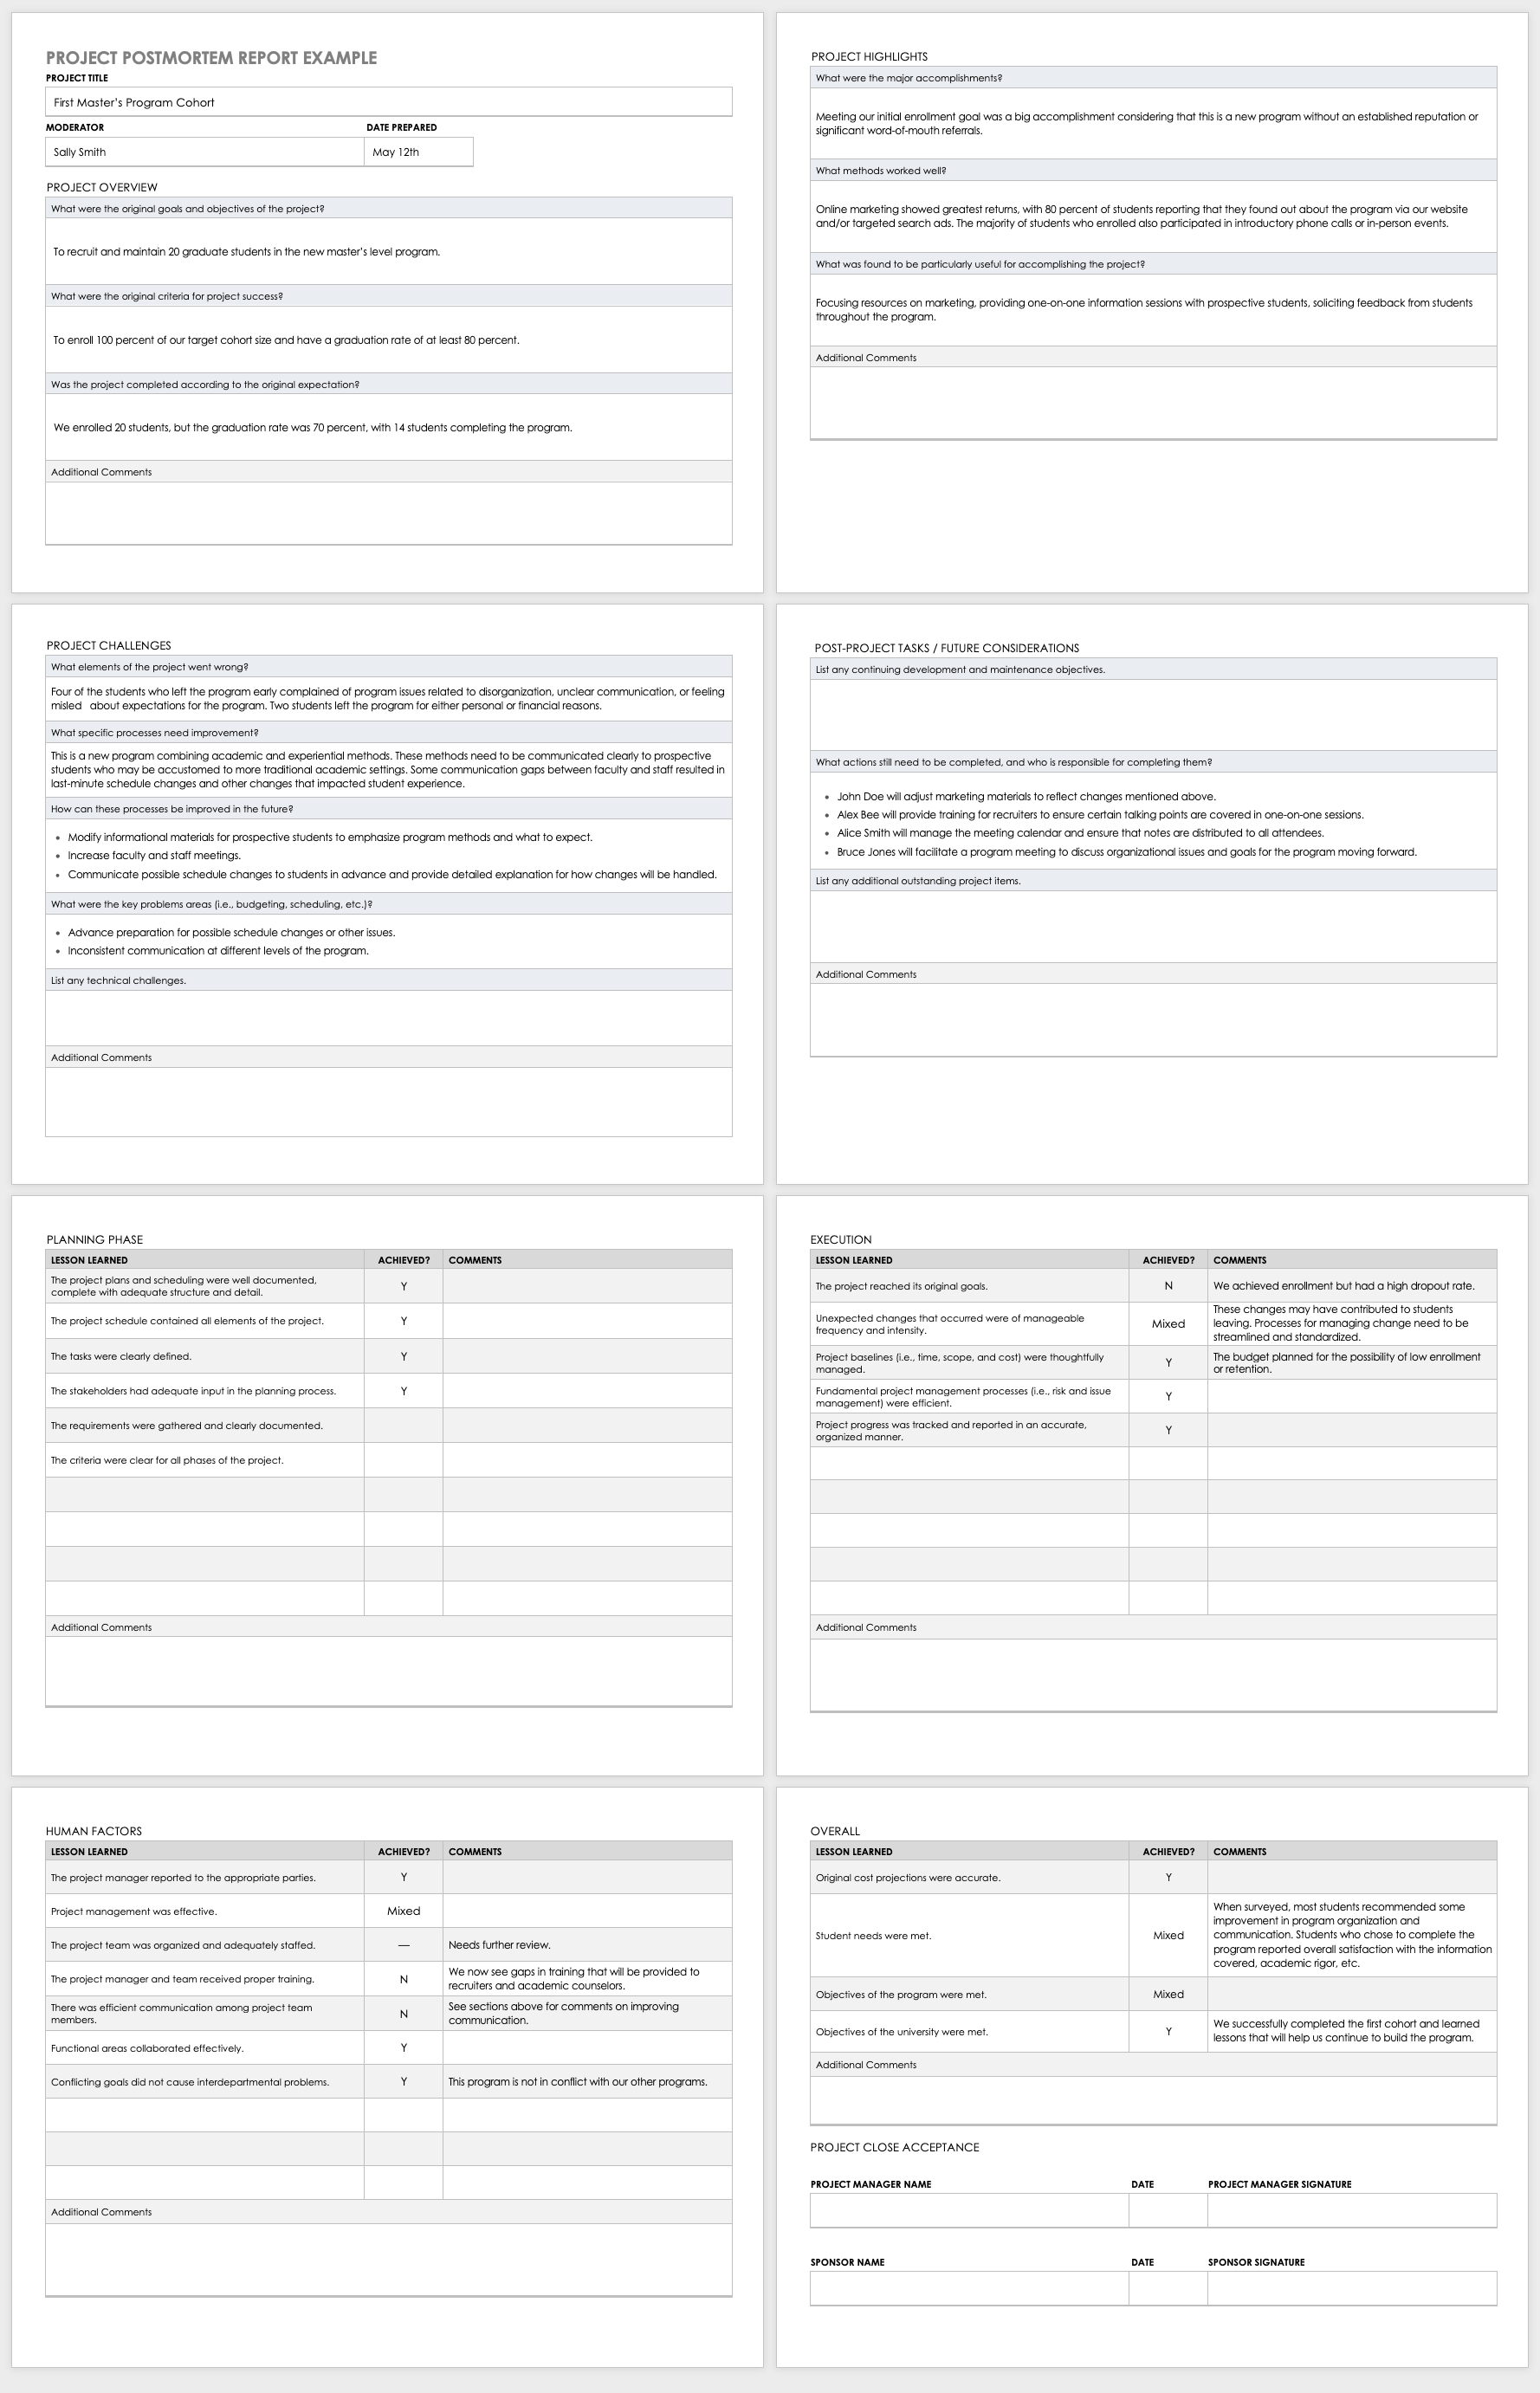 Project Postmortem Report Example